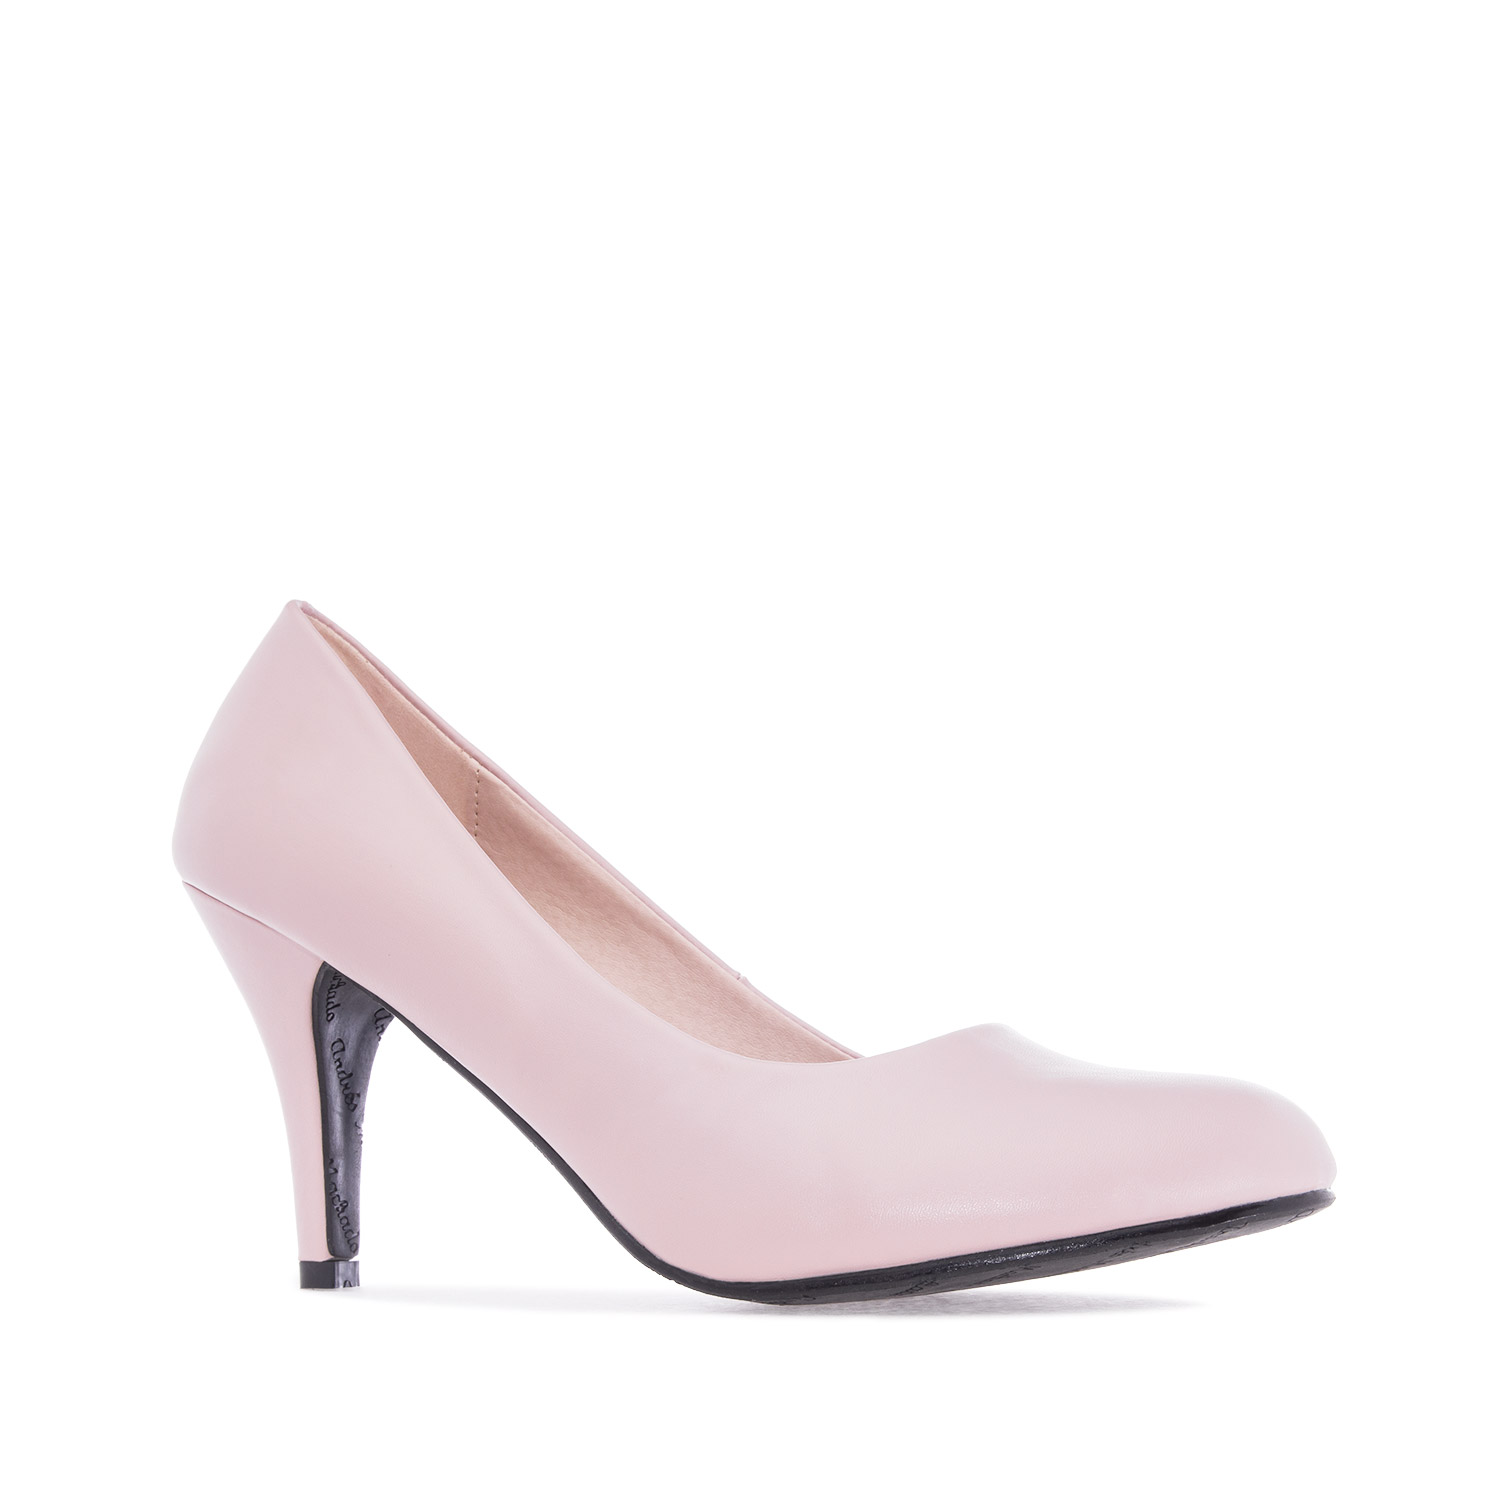 Retro High Heel Pumps in Pink faux Leather 